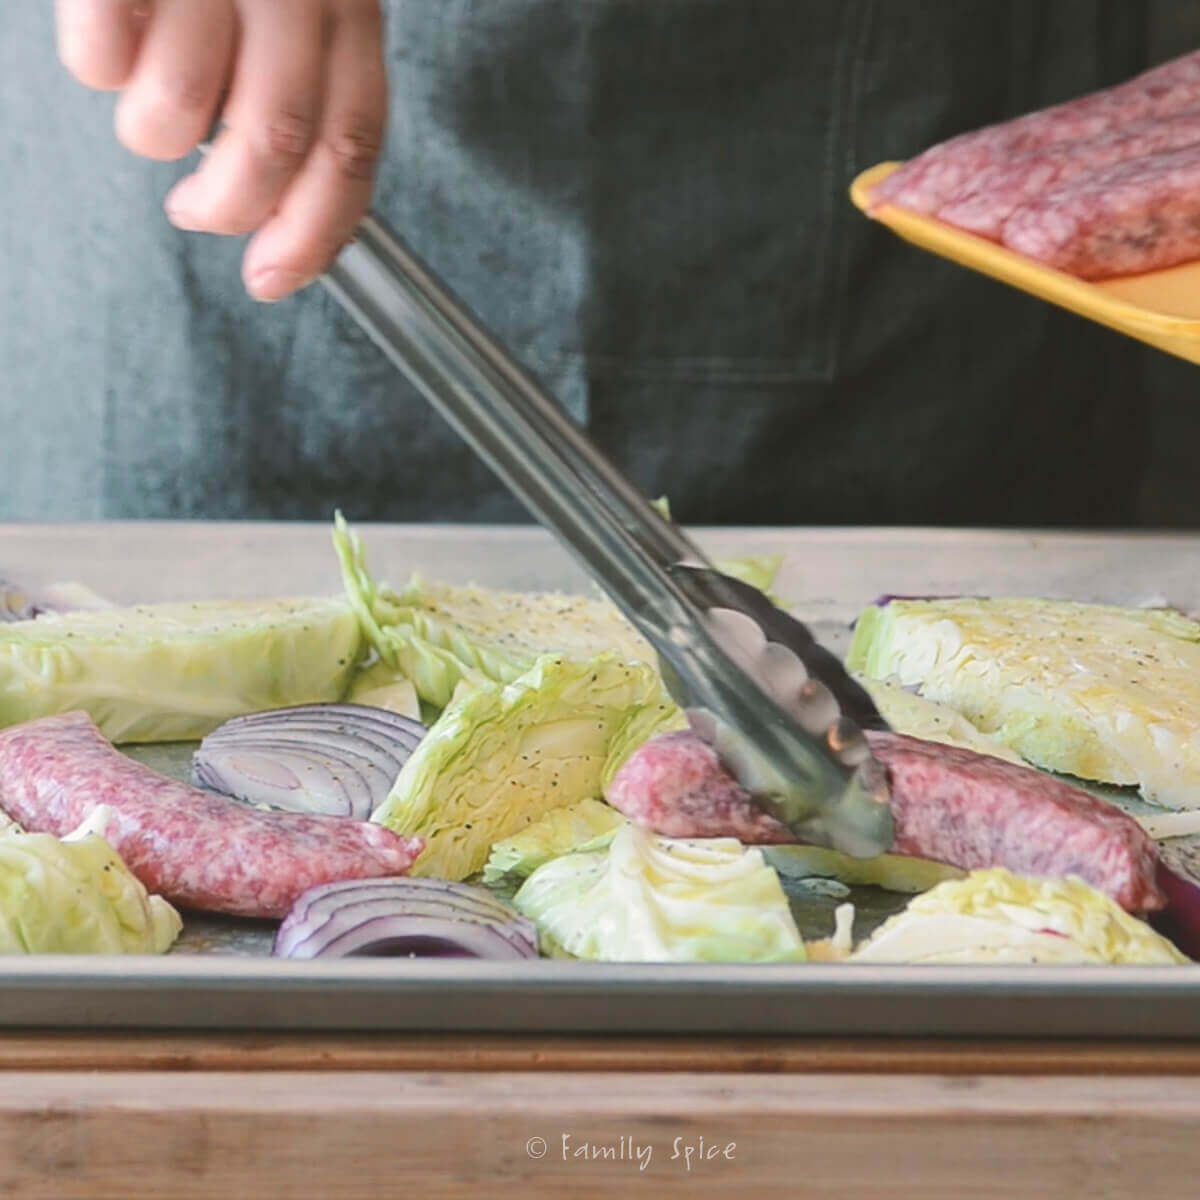 Using tongs to place brats on a baking sheet with wedges of cabbage and red onions